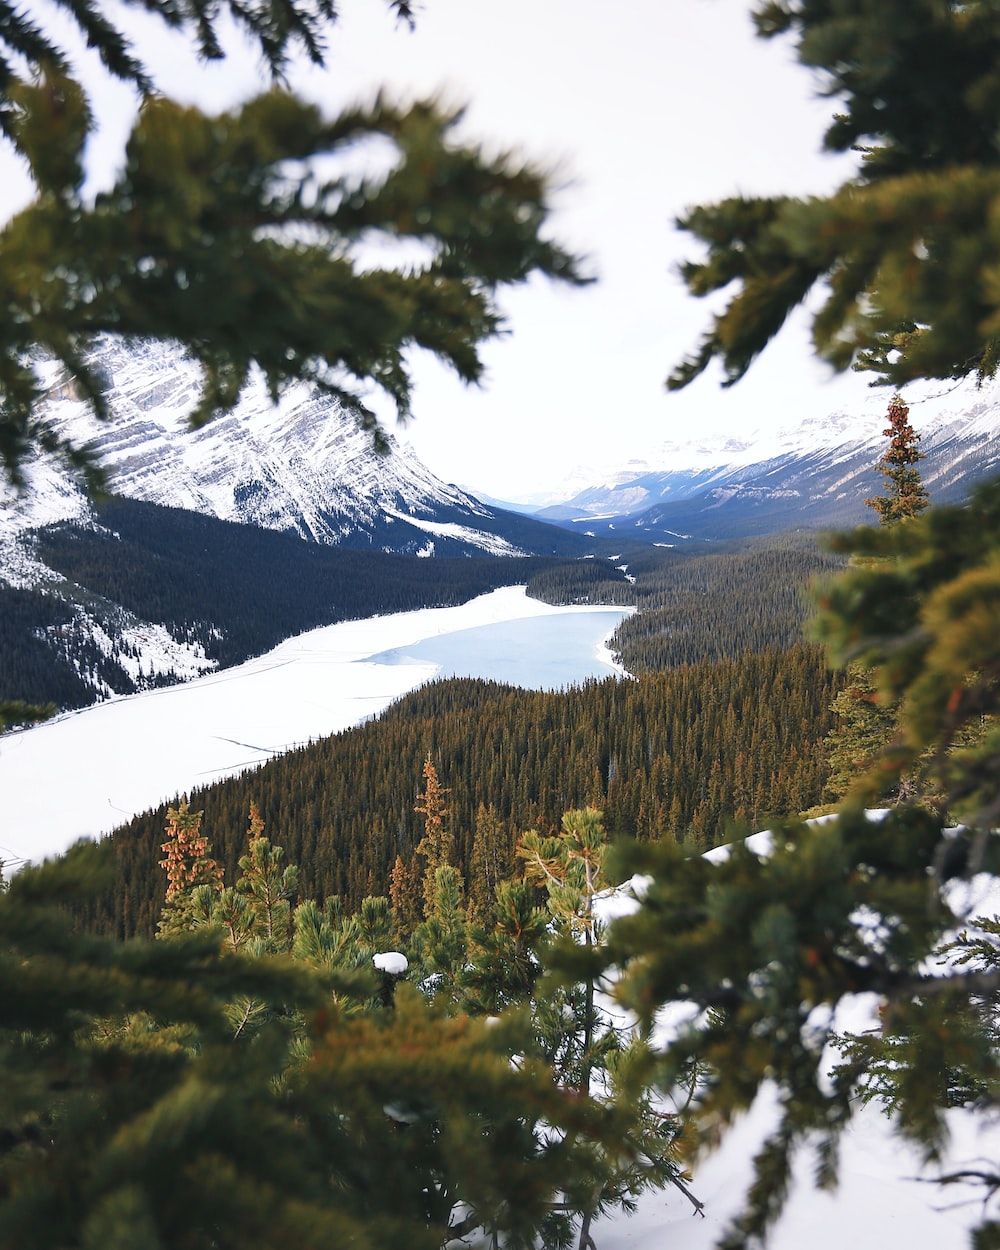 Lake between mountains with pine trees photo